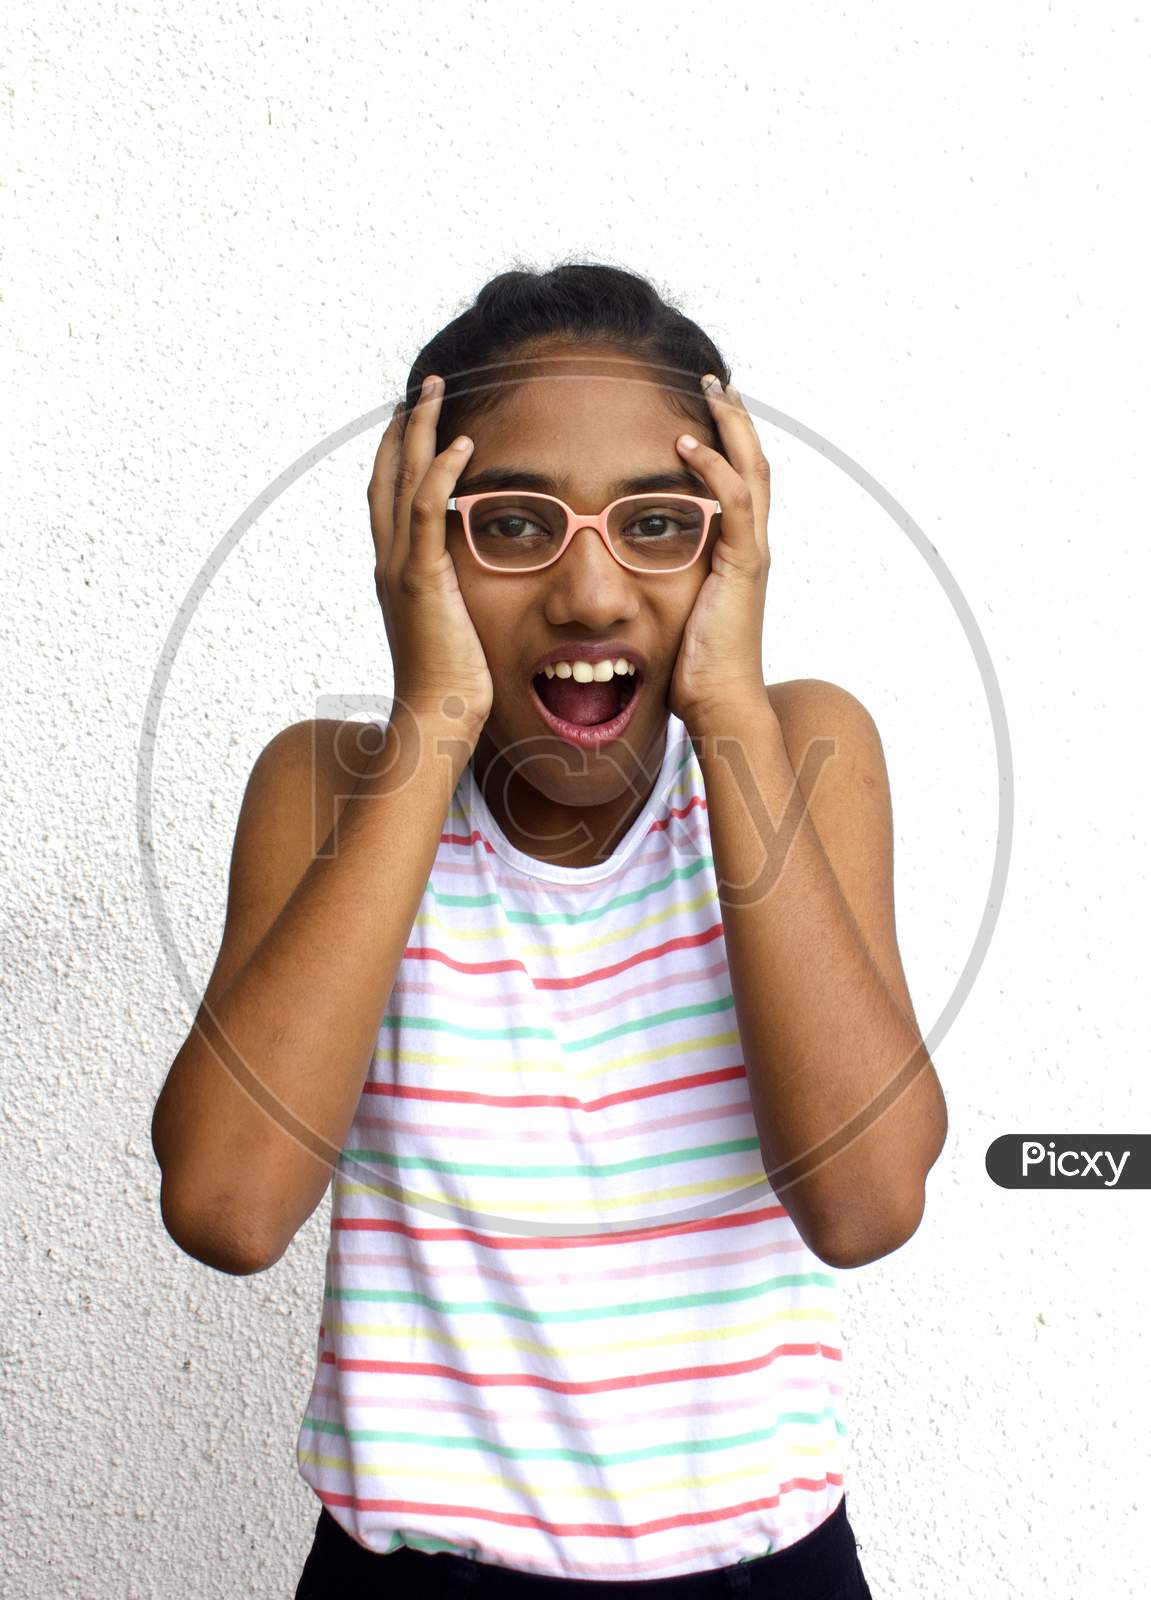 Portrait of a Young Indian Girl with Shouting Expression